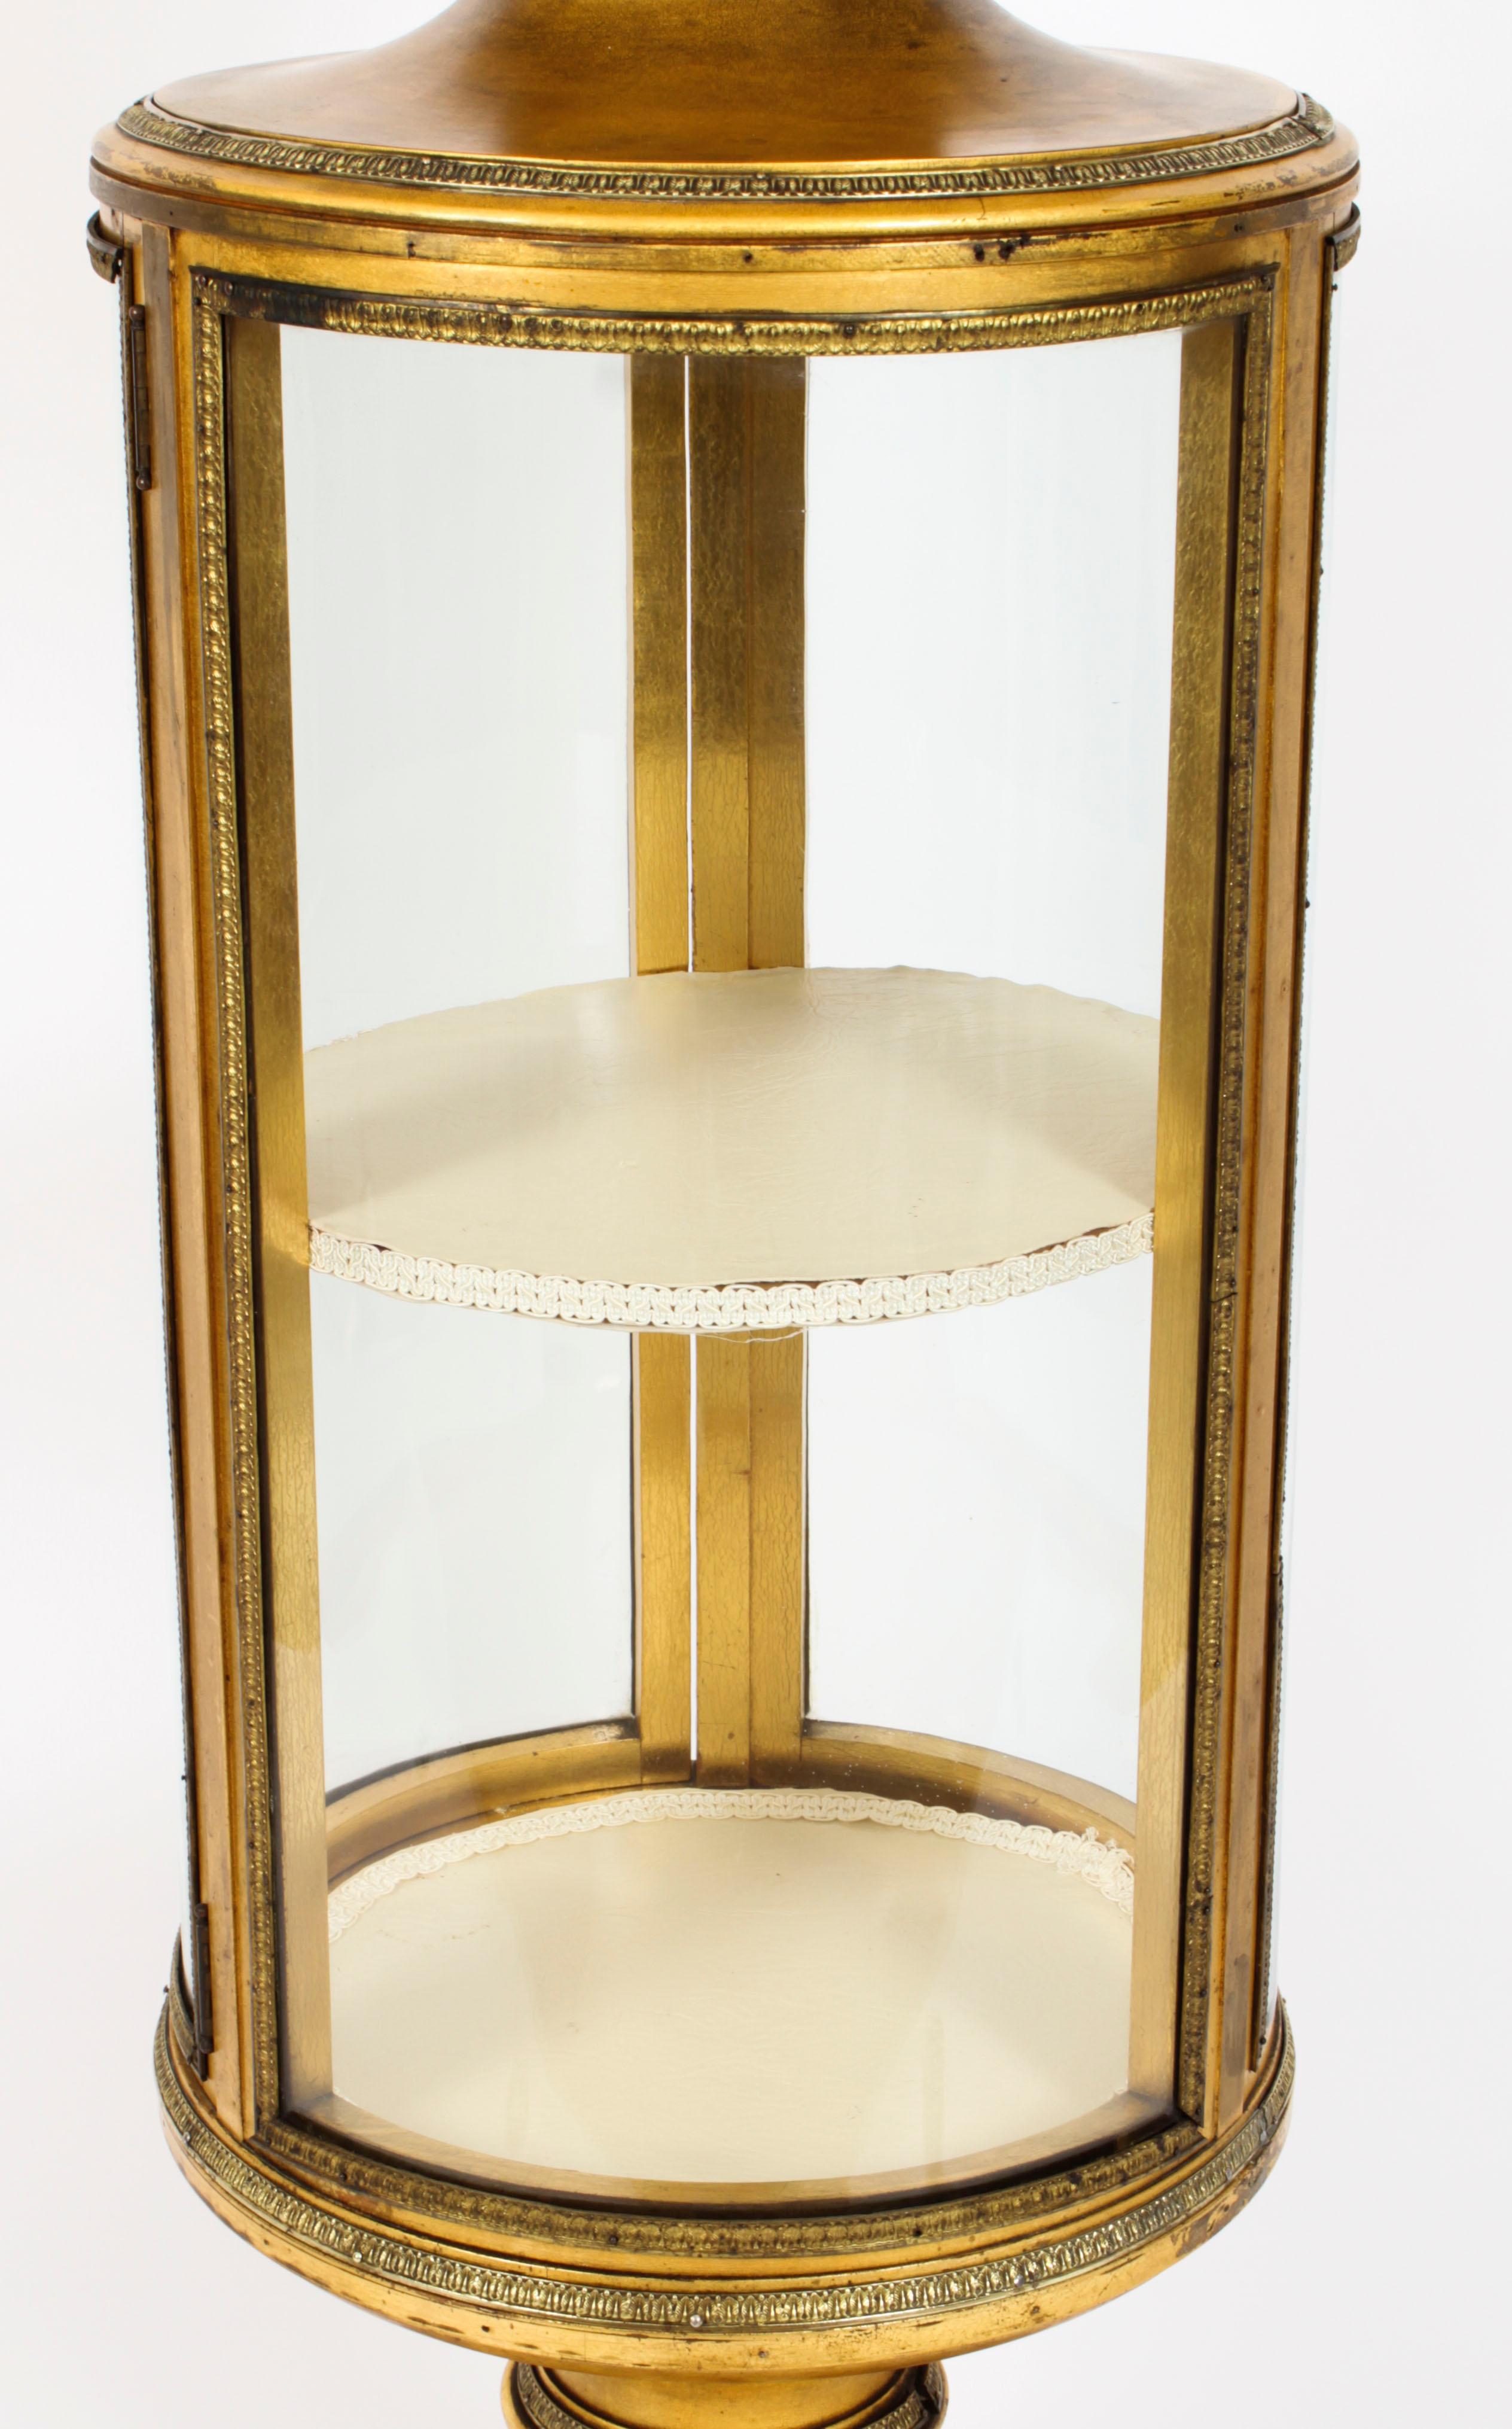 Antique French Giltwood Cylindrical Pedestal Display Cabinet, 19th Century For Sale 8